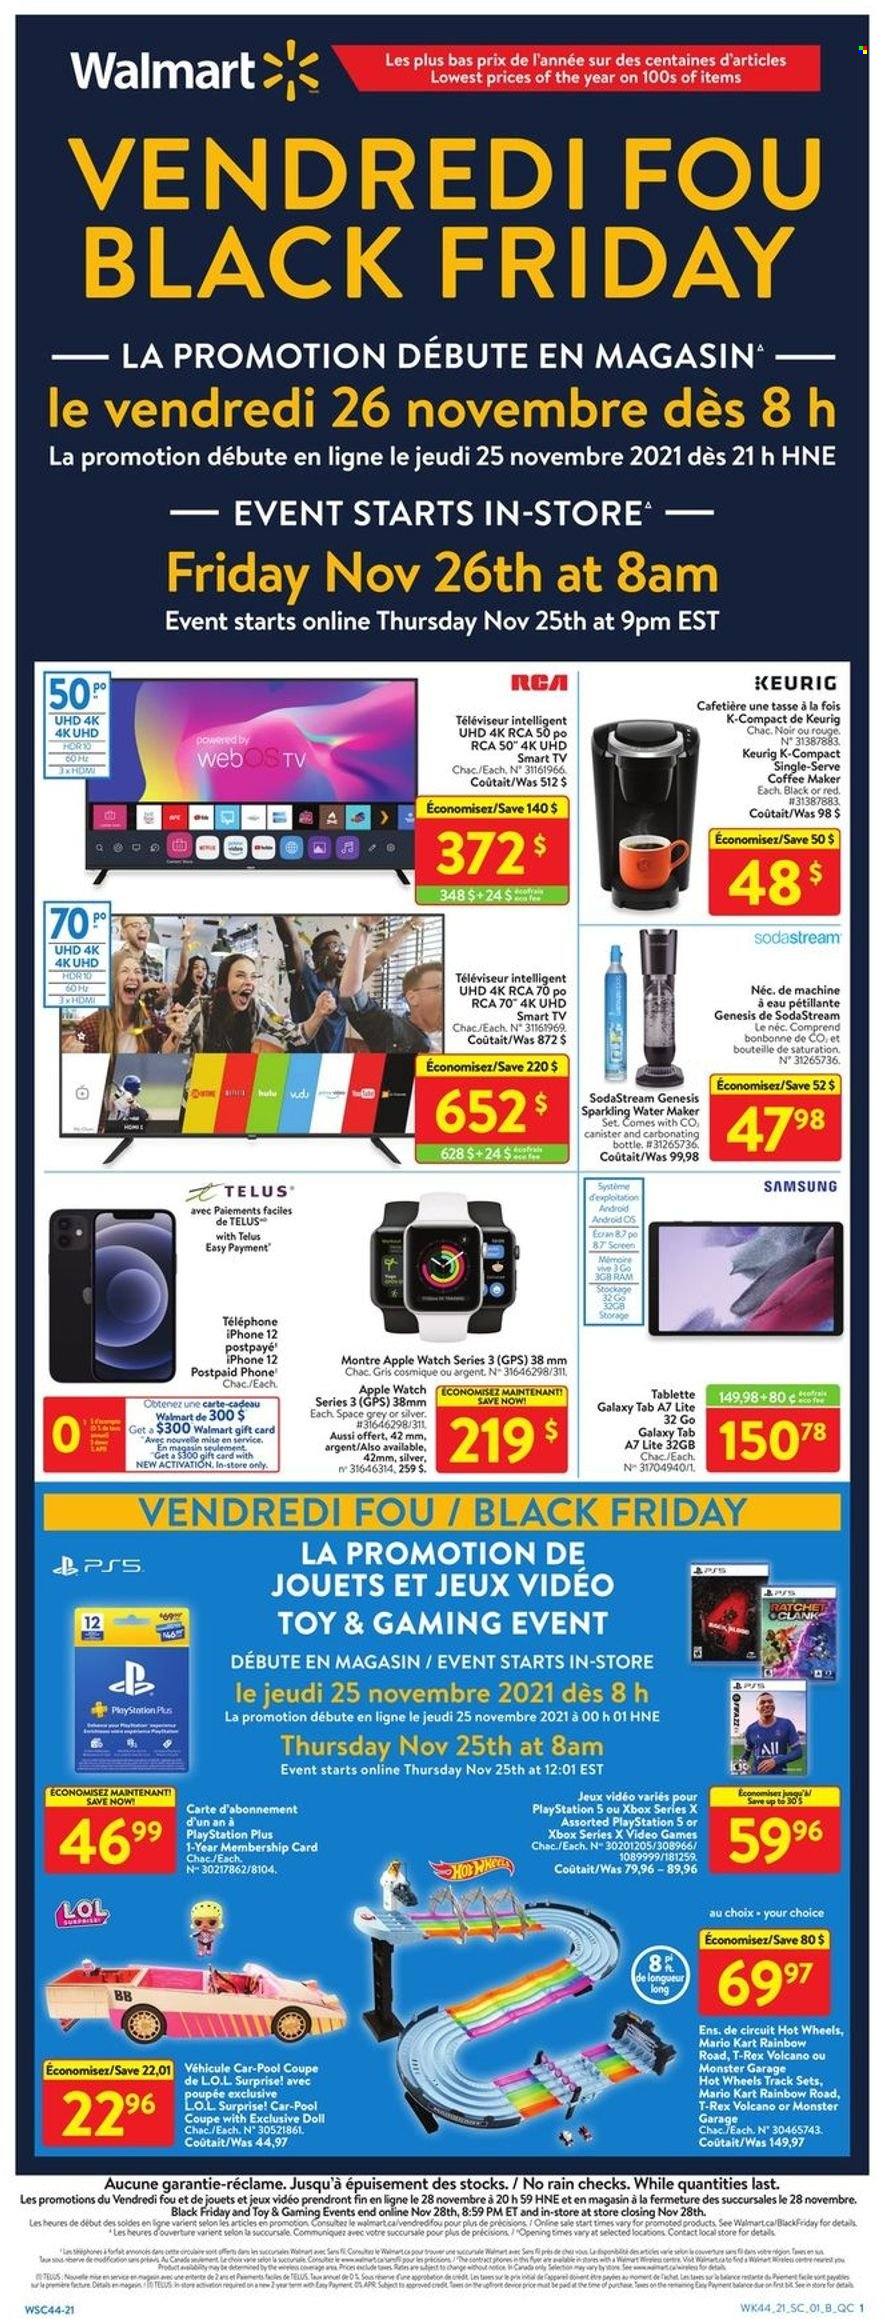 thumbnail - Walmart Flyer - November 25, 2021 - November 28, 2021 - Sales products - Apple, Samsung Galaxy, Samsung Galaxy Tab, Monster, Keurig, Hot Wheels, canister, SodaStream, Samsung, iPhone, phone, iPhone 12, RCA, PlayStation, PlayStation Plus, PlayStation 5, Xbox Series X, UHD TV, TV, coffee machine, water maker, watch, doll, toys, pool, smart tv, Apple Watch, Xbox. Page 1.